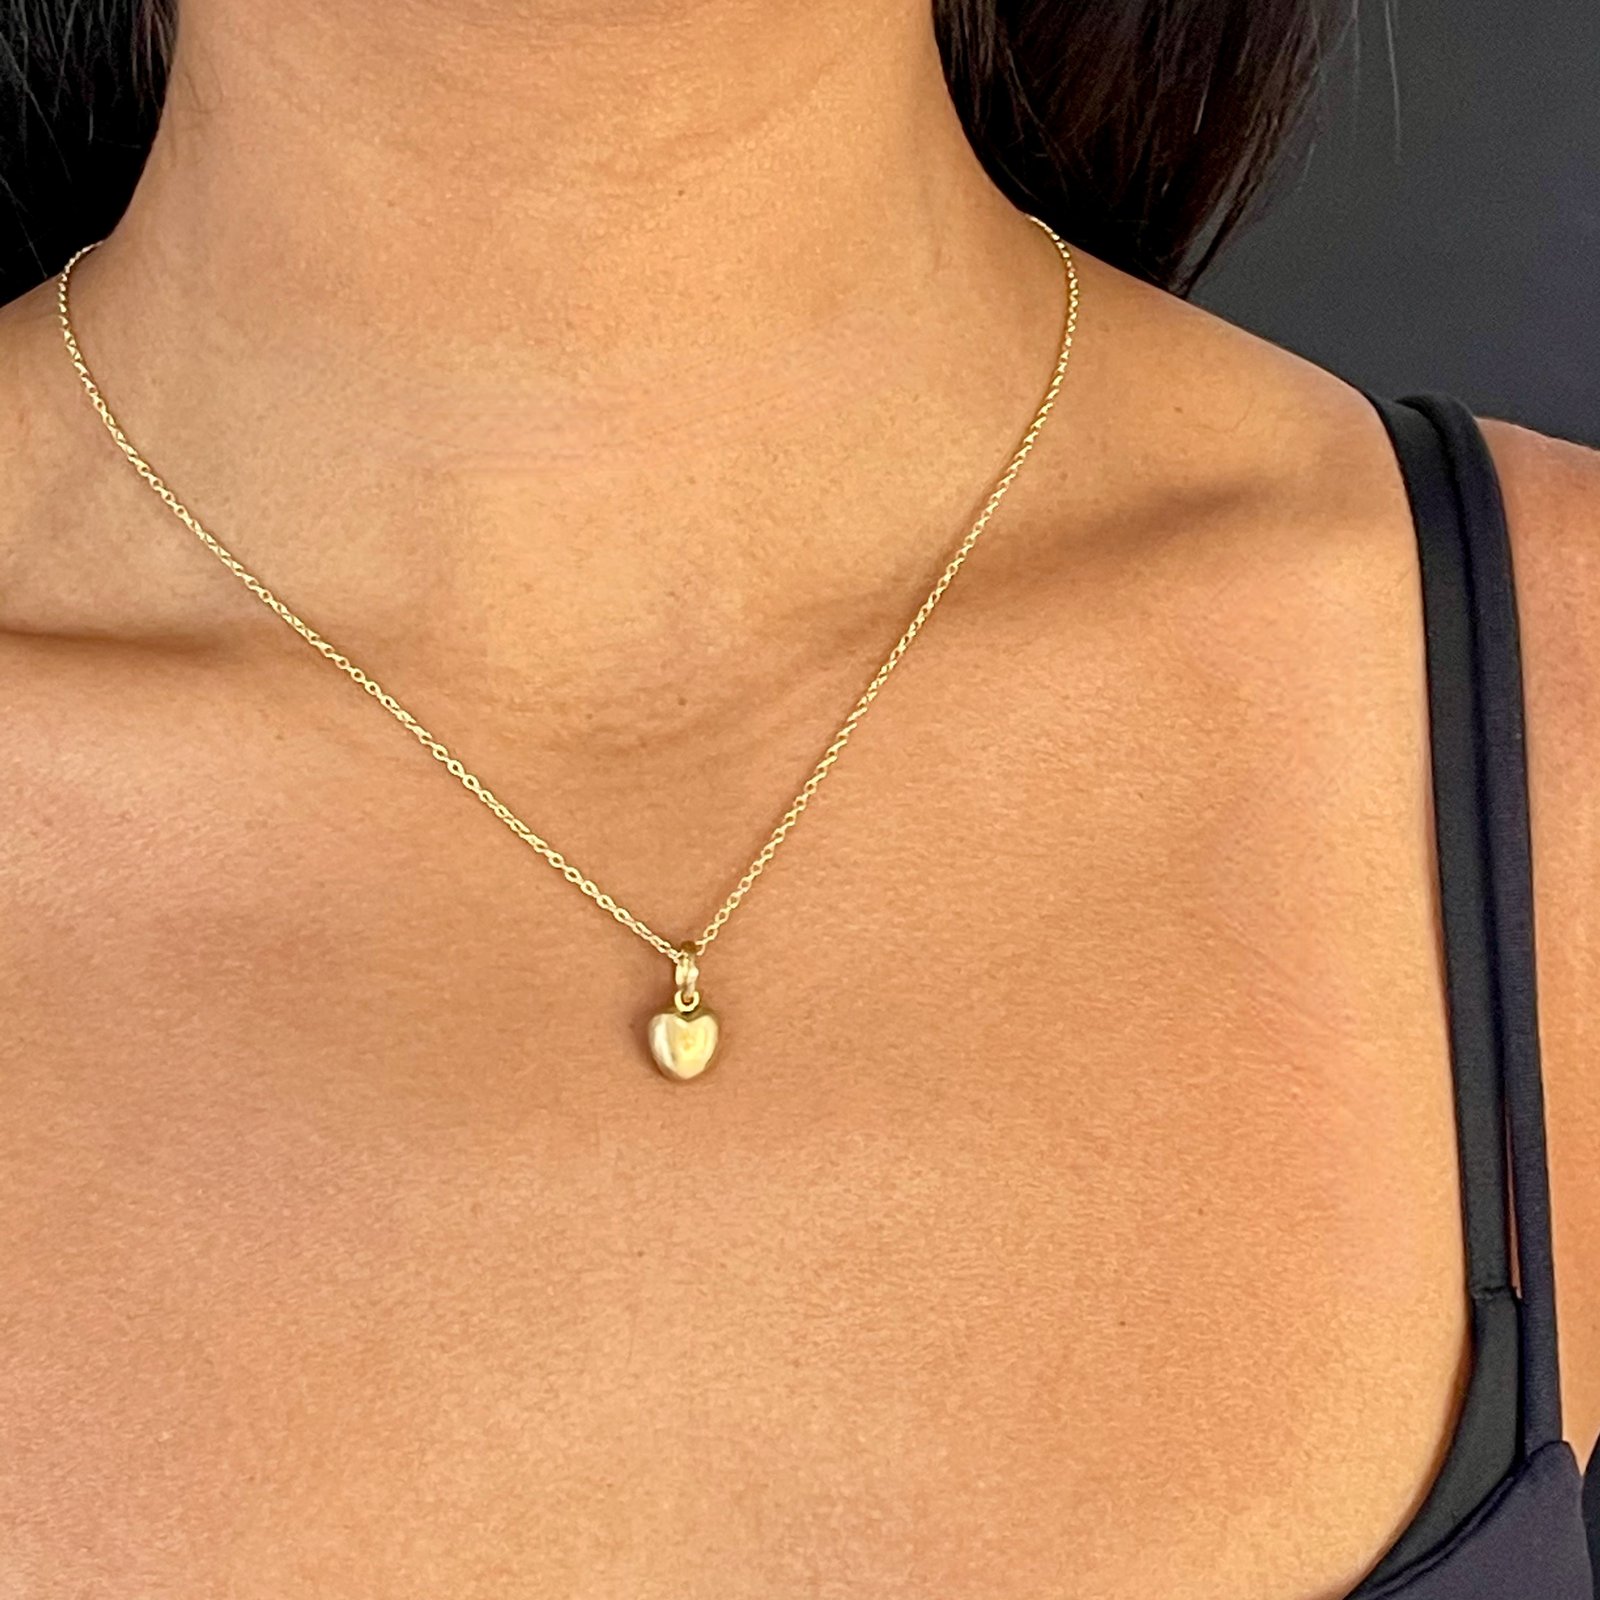 The Best Clothes Colors to Go With Rose Gold Necklaces